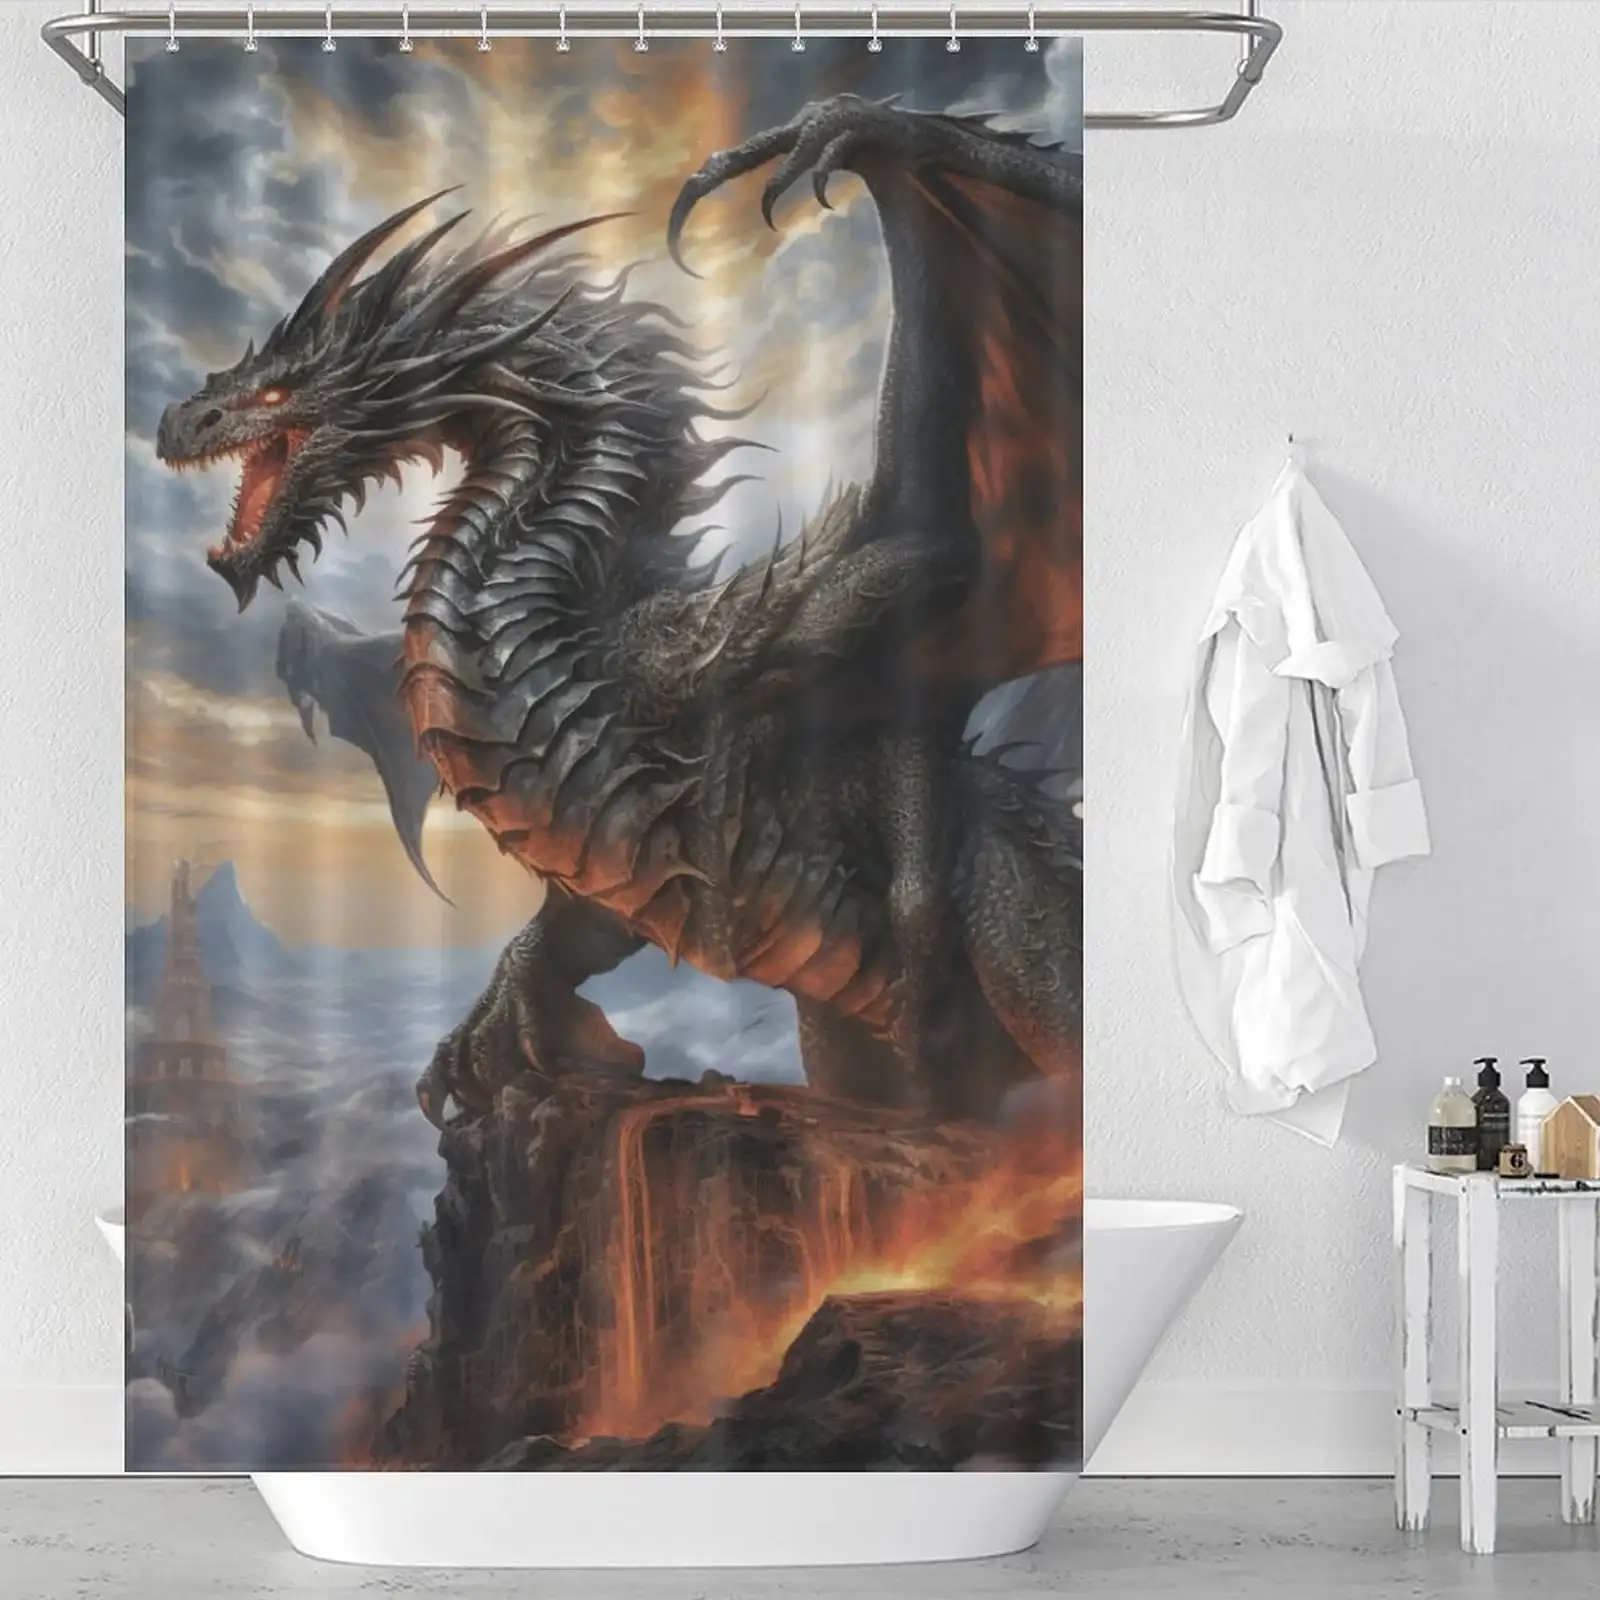 Unique Shower Curtains for Small Bathrooms: An image of a dragon on fire shower curtain.